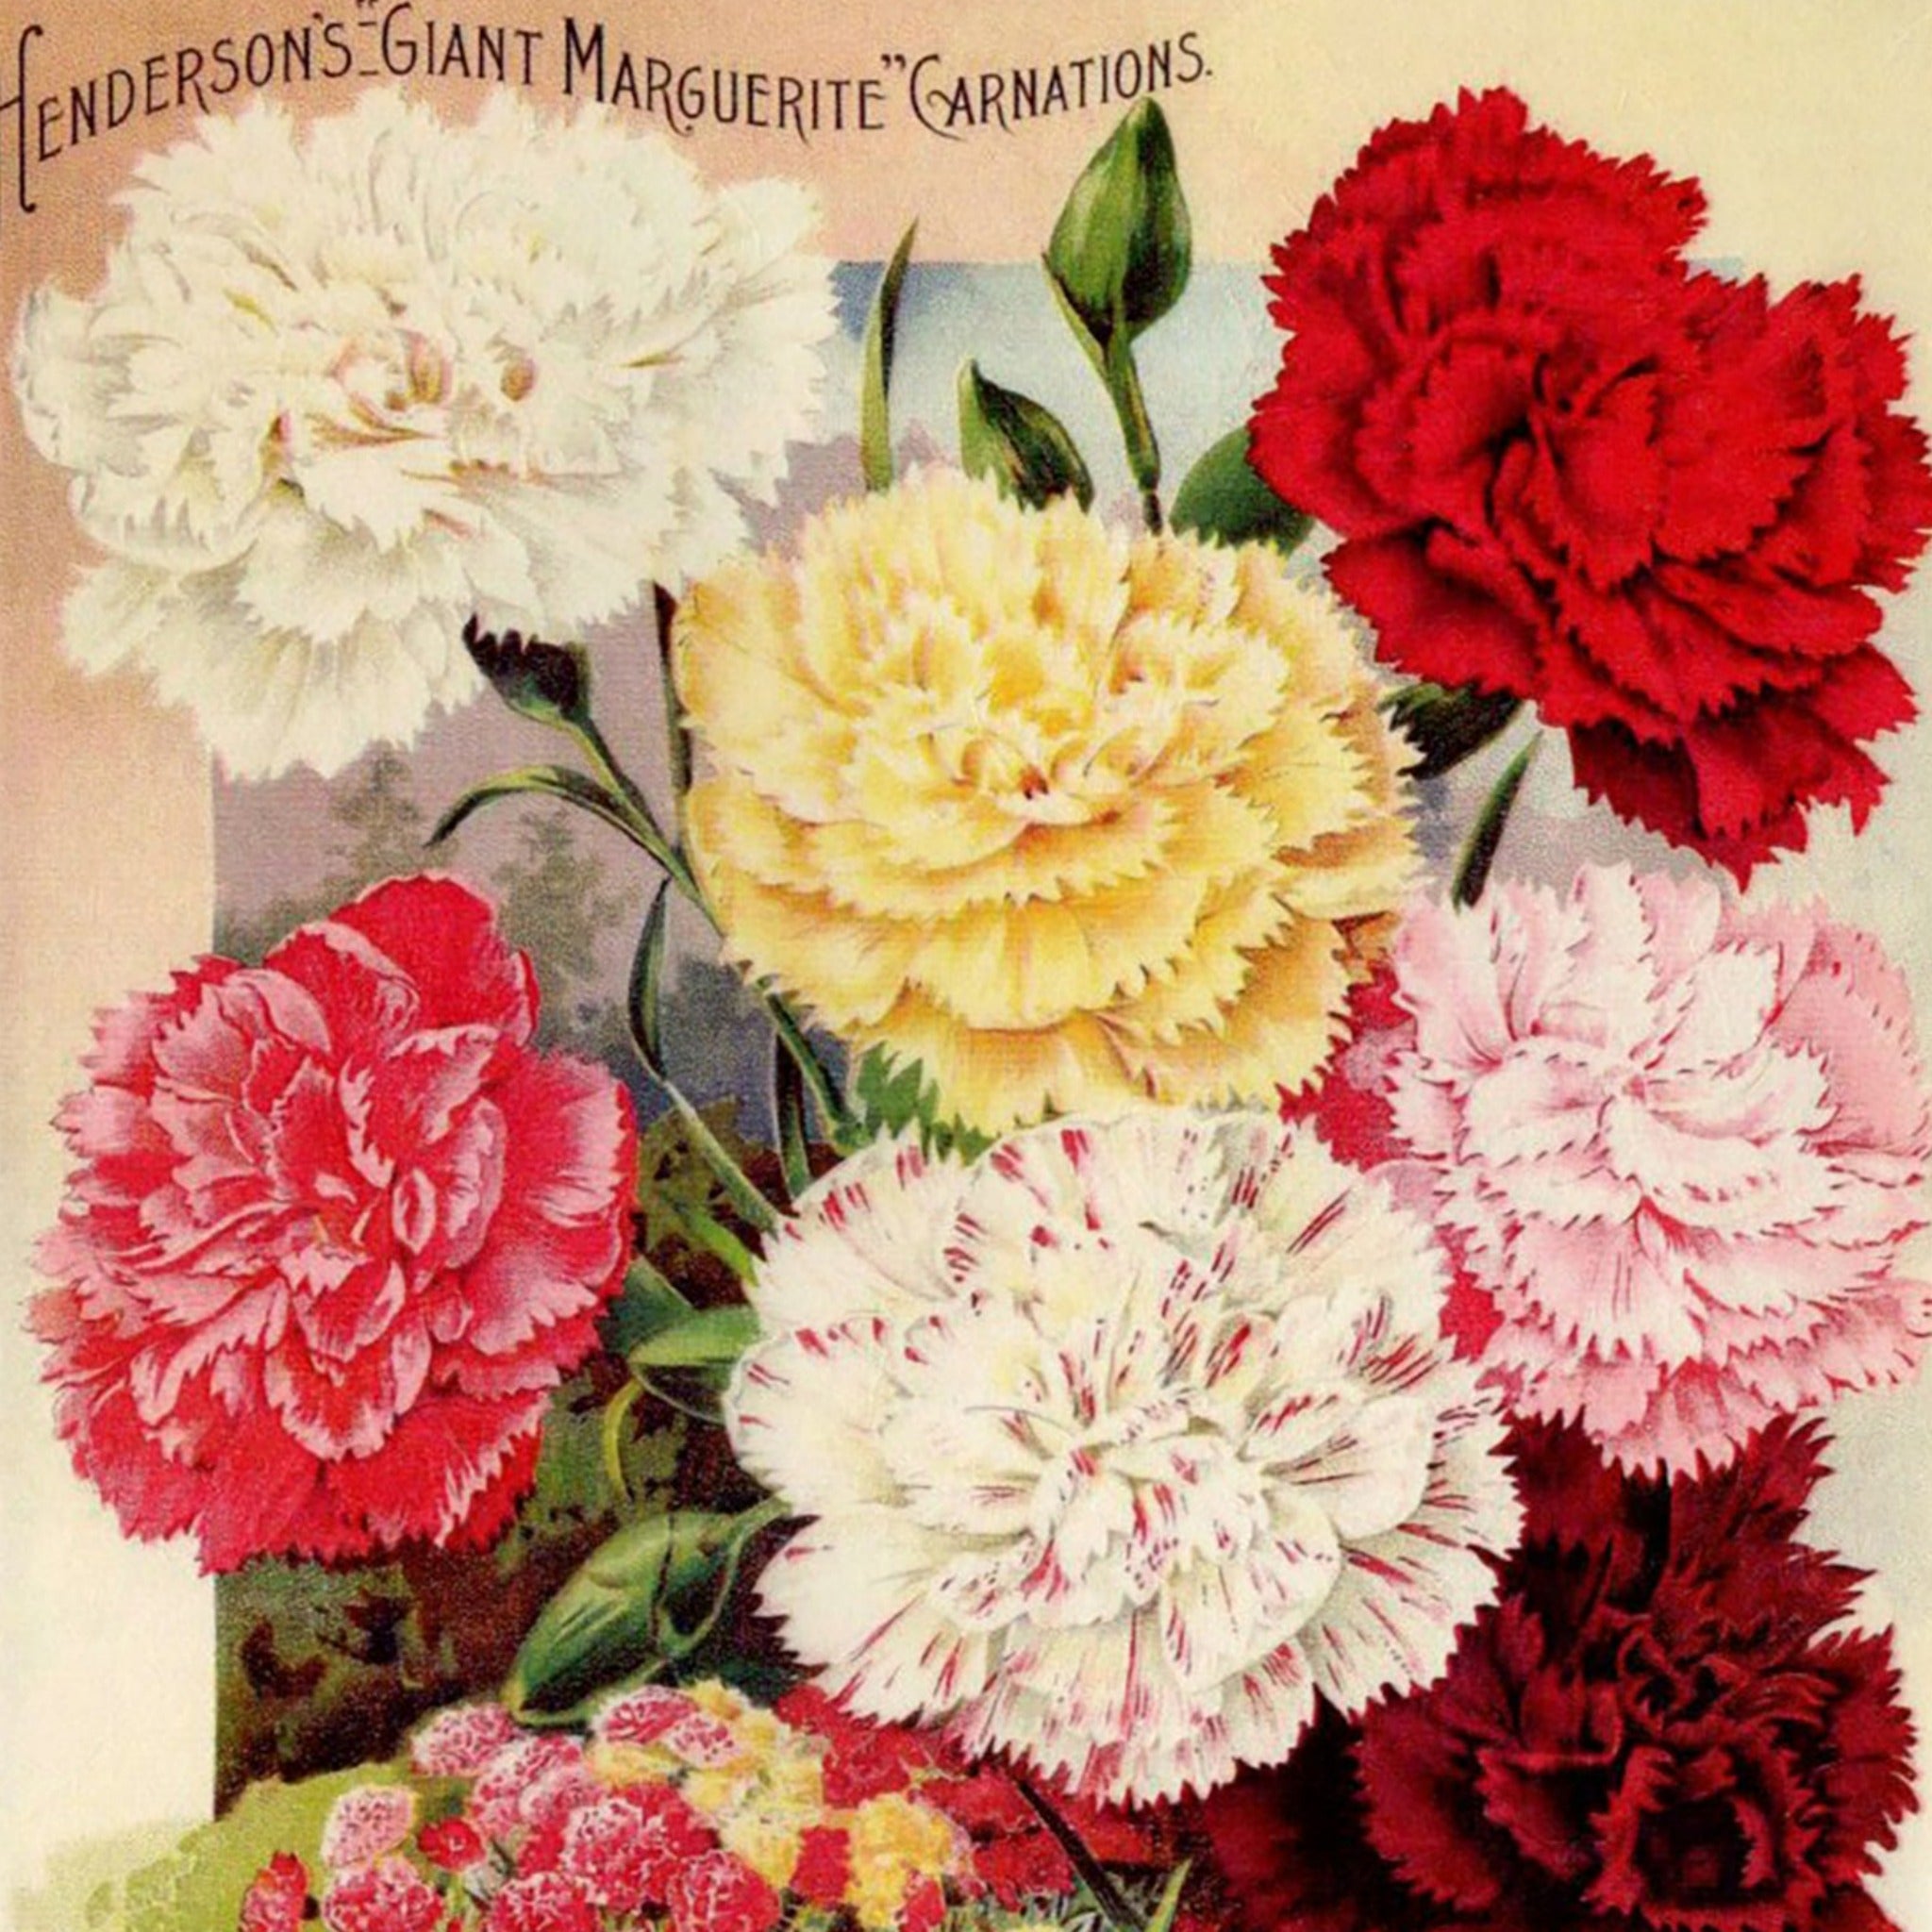 A4 rice paper design that features a large, beautiful bouquet of carnations on a vintage magazine.